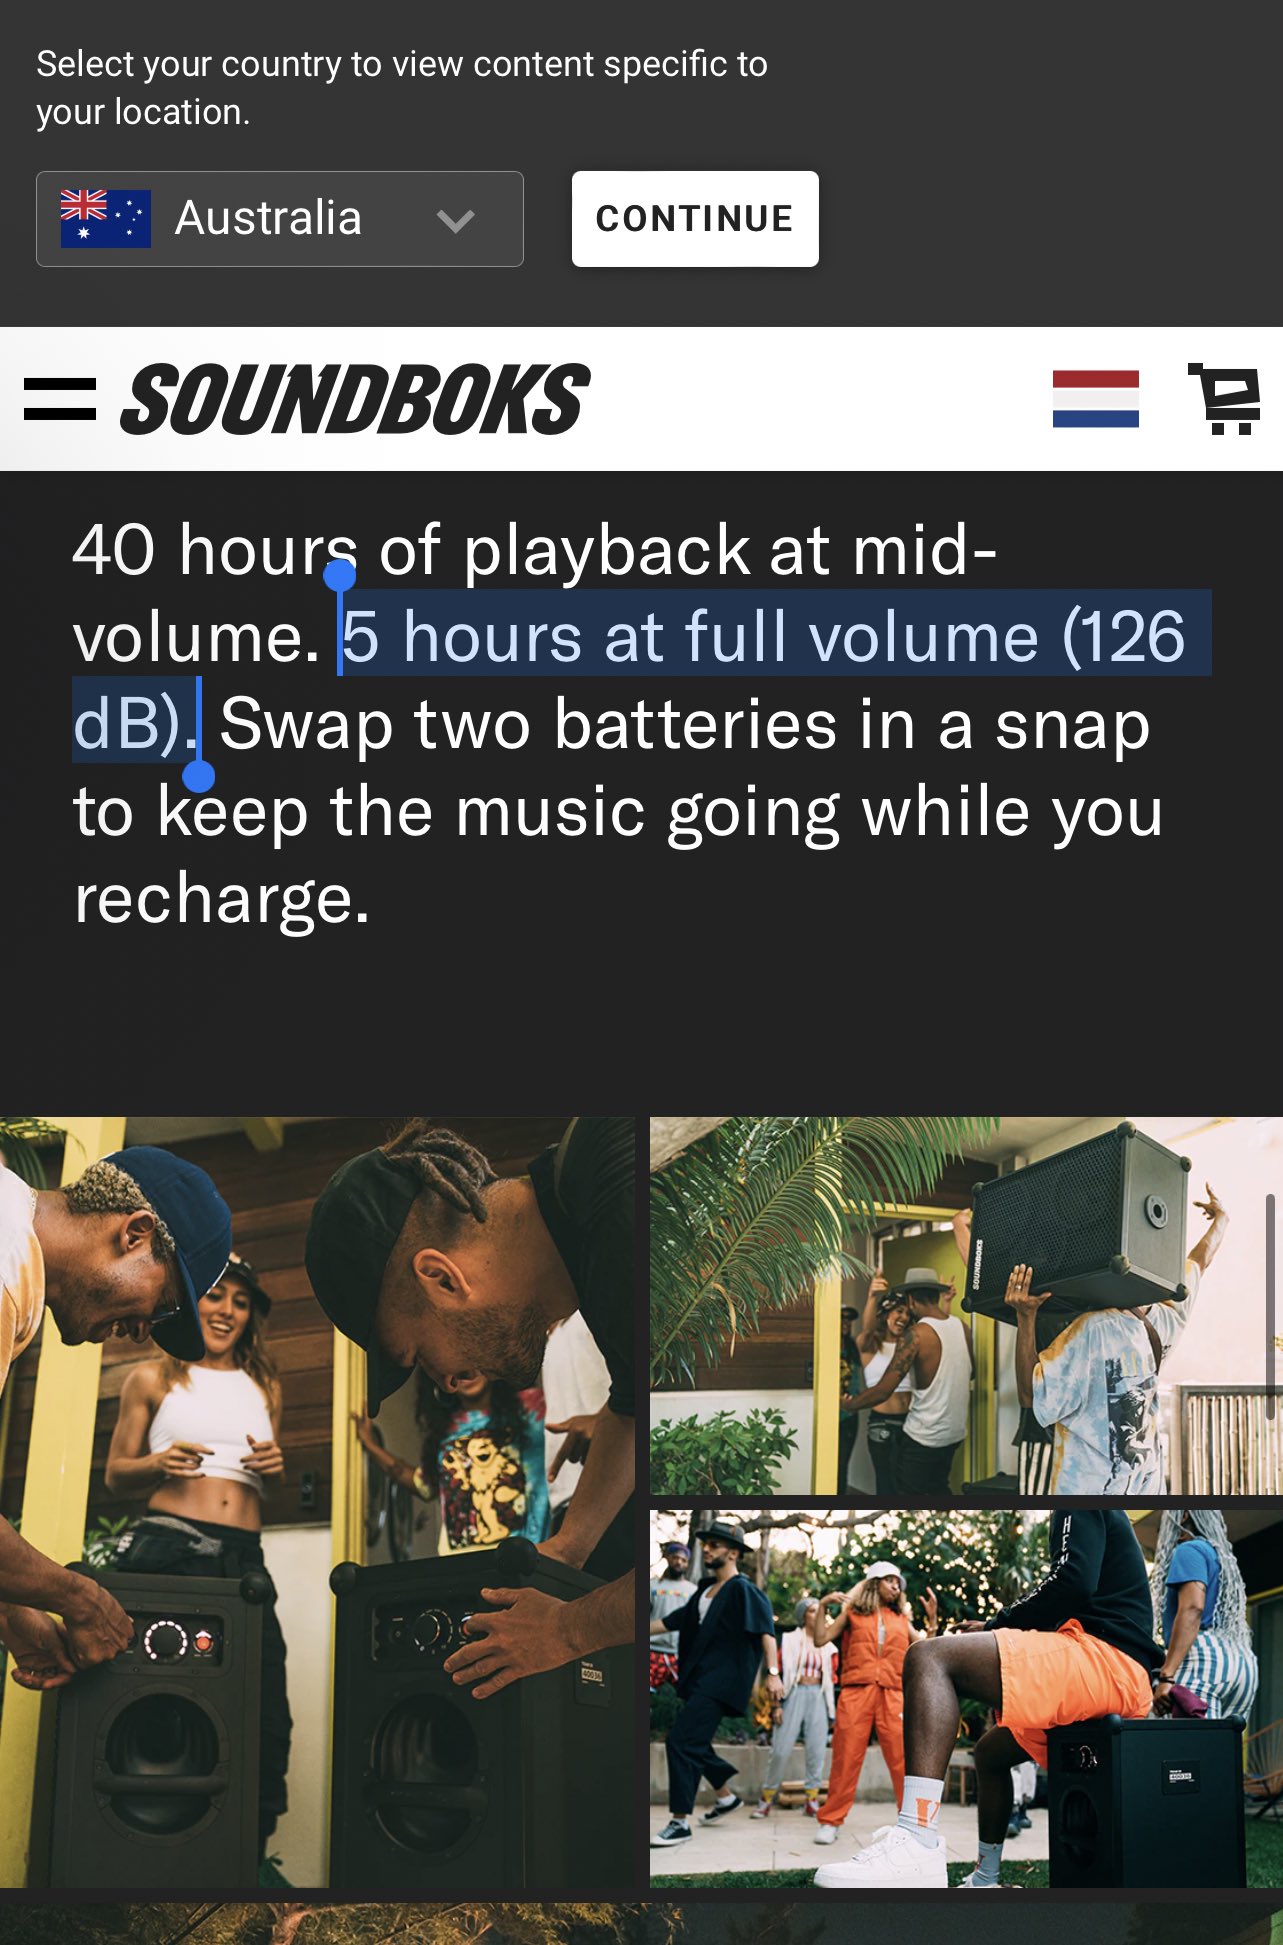 Latest SOUNDBOKS firmware cuts the performance of their speakers by half in a "mandatory firmware update"